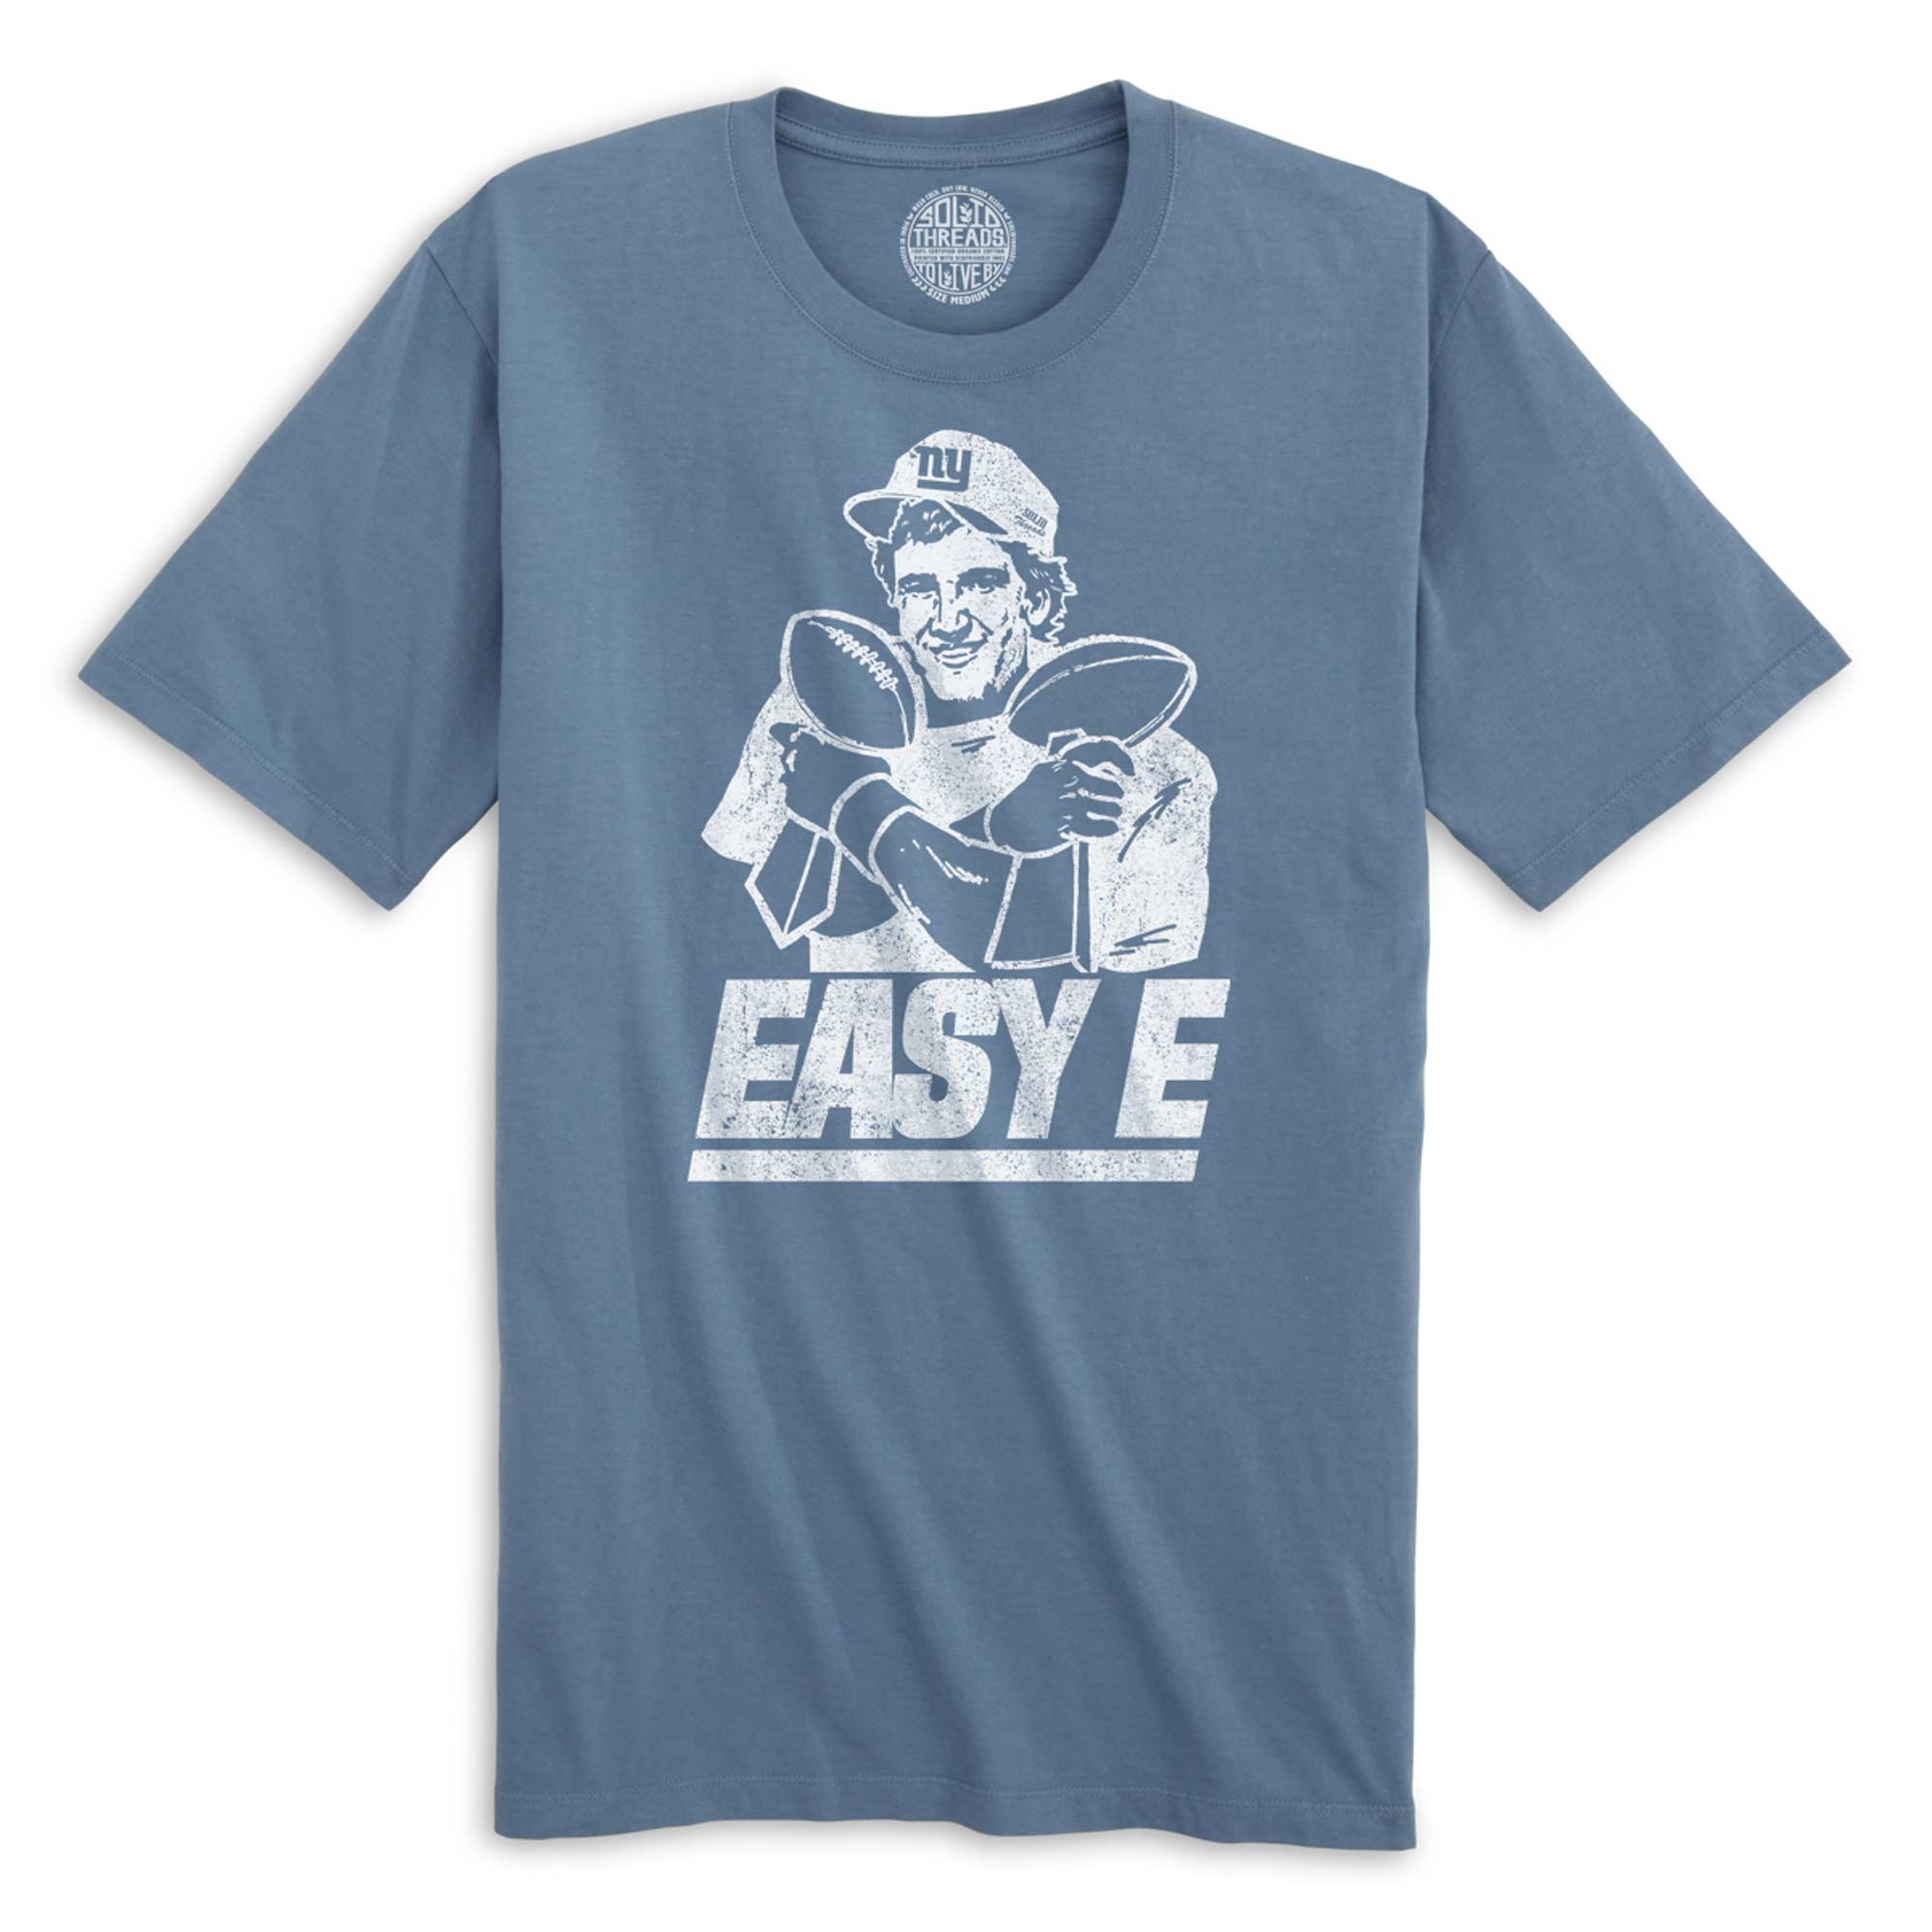 Easy E Vintage Organic Cotton T-shirt | Funny Ny Giants  Tee On Model | Solid Threads